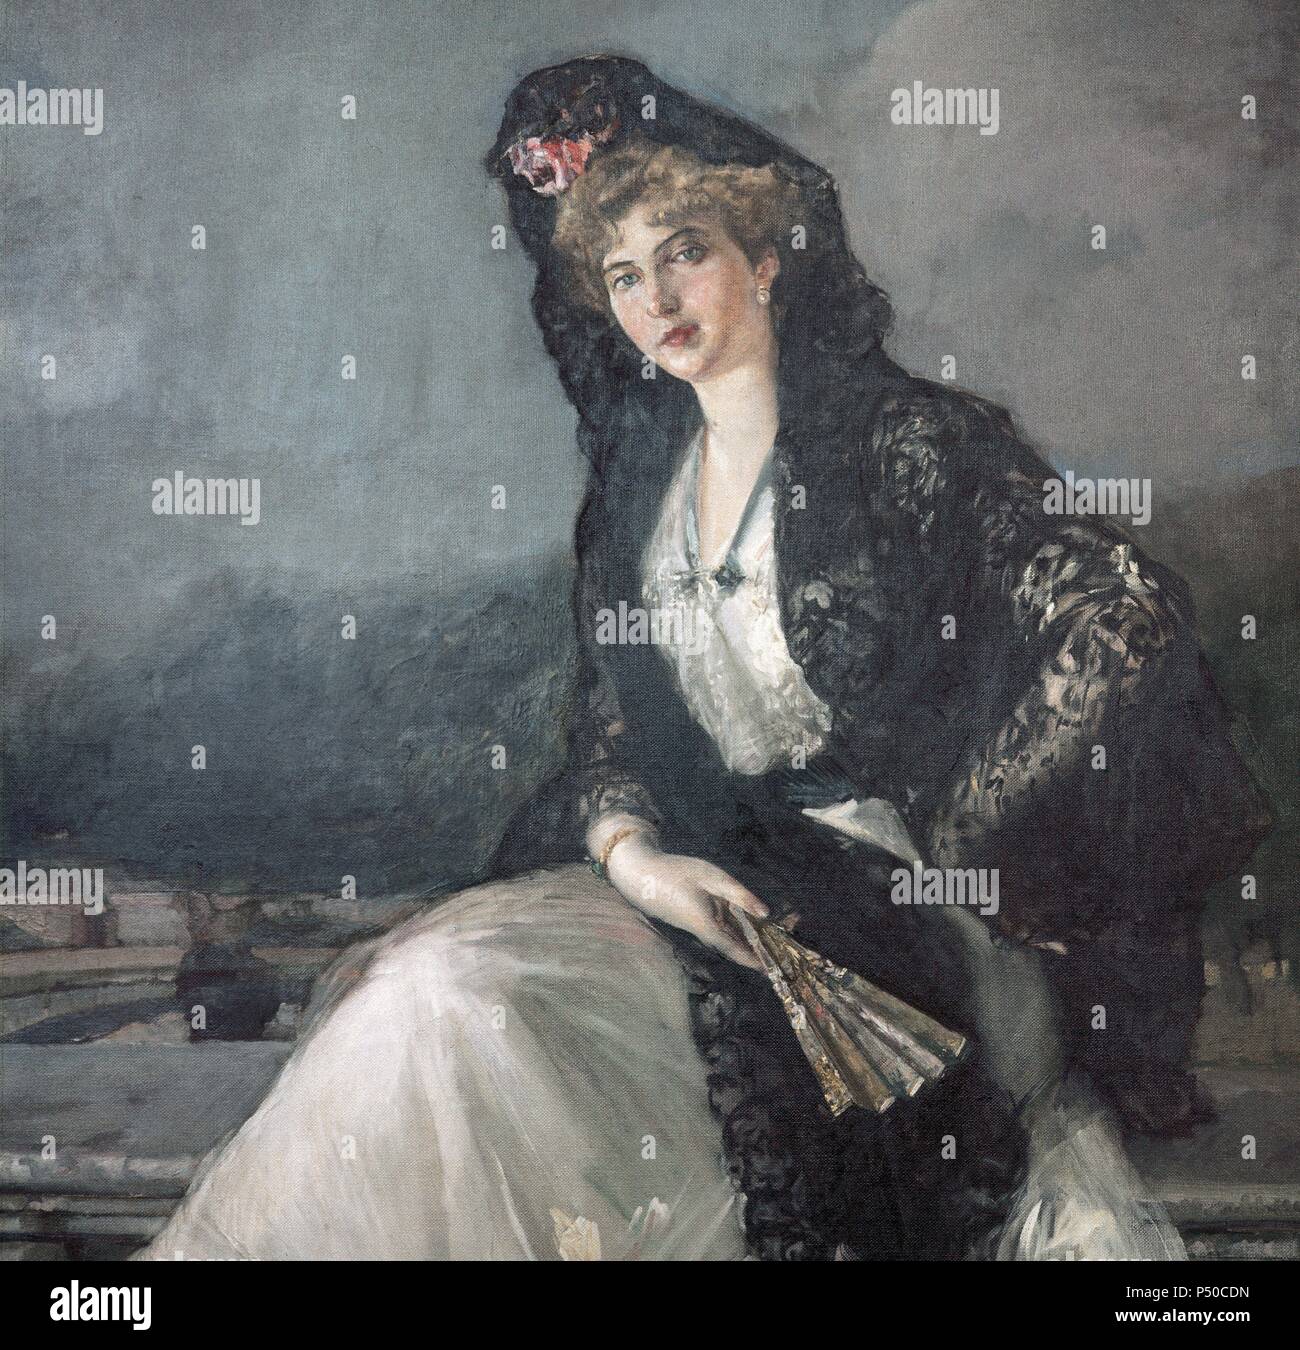 Victoria Eugenie of Battenberg (1887-1969). Queen consort of King Alfonso XIII of Spain. Victoria Eugenia dressed in Spanish fashion. Portrait by Joaquin Sorolla (1863-1923). Magdalena Palace. Santander. Cantabria. Spain. Stock Photo